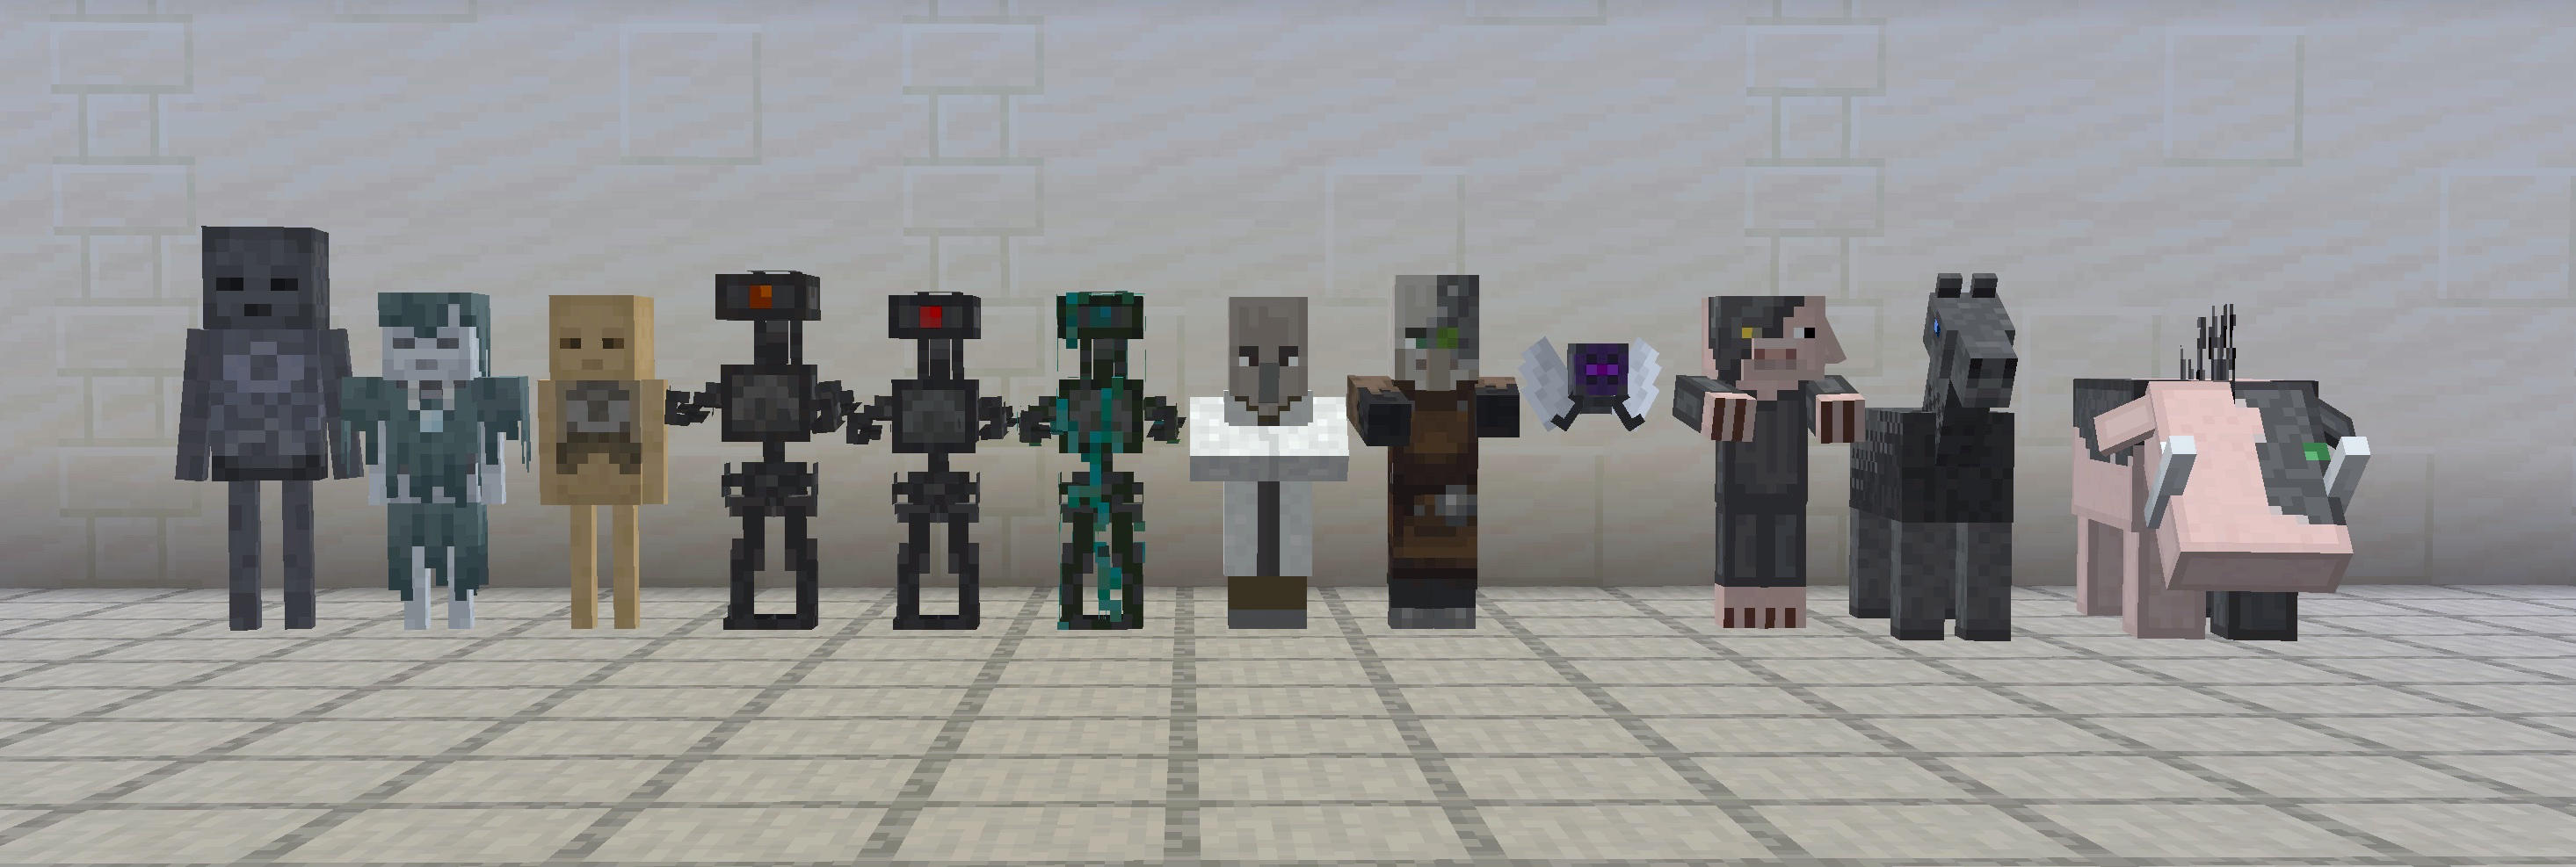 The rethemed mobs